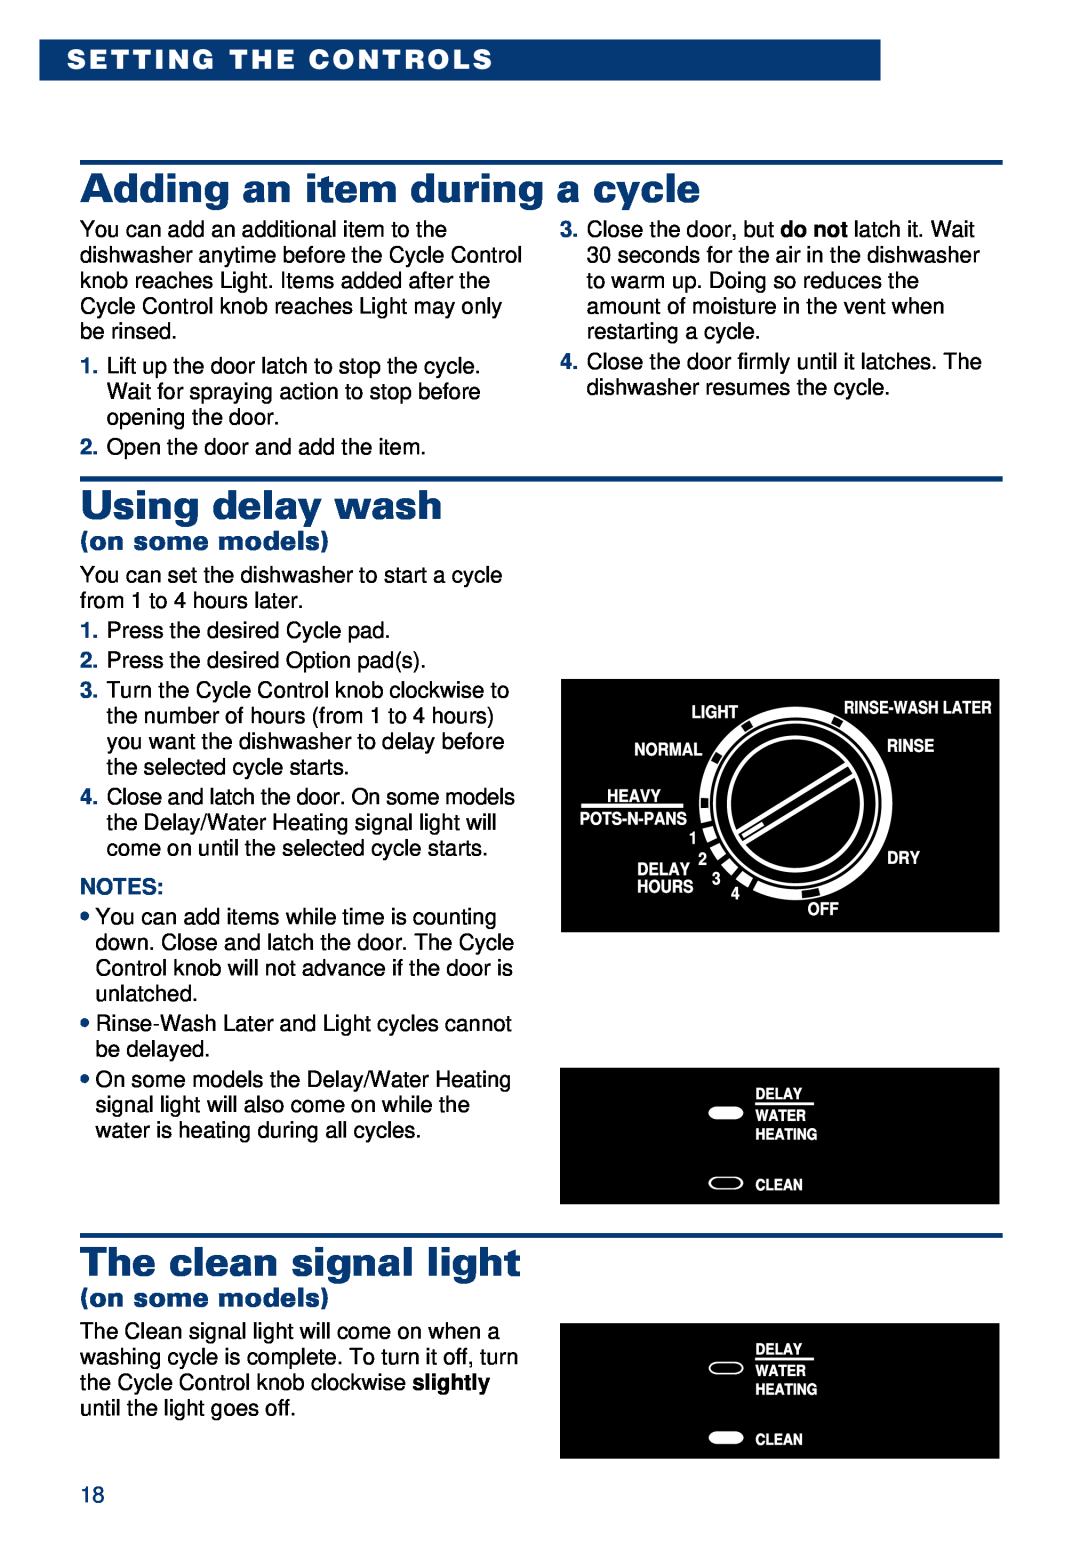 Whirlpool 900 warranty Adding an item during a cycle, Using delay wash, The clean signal light, on some models 